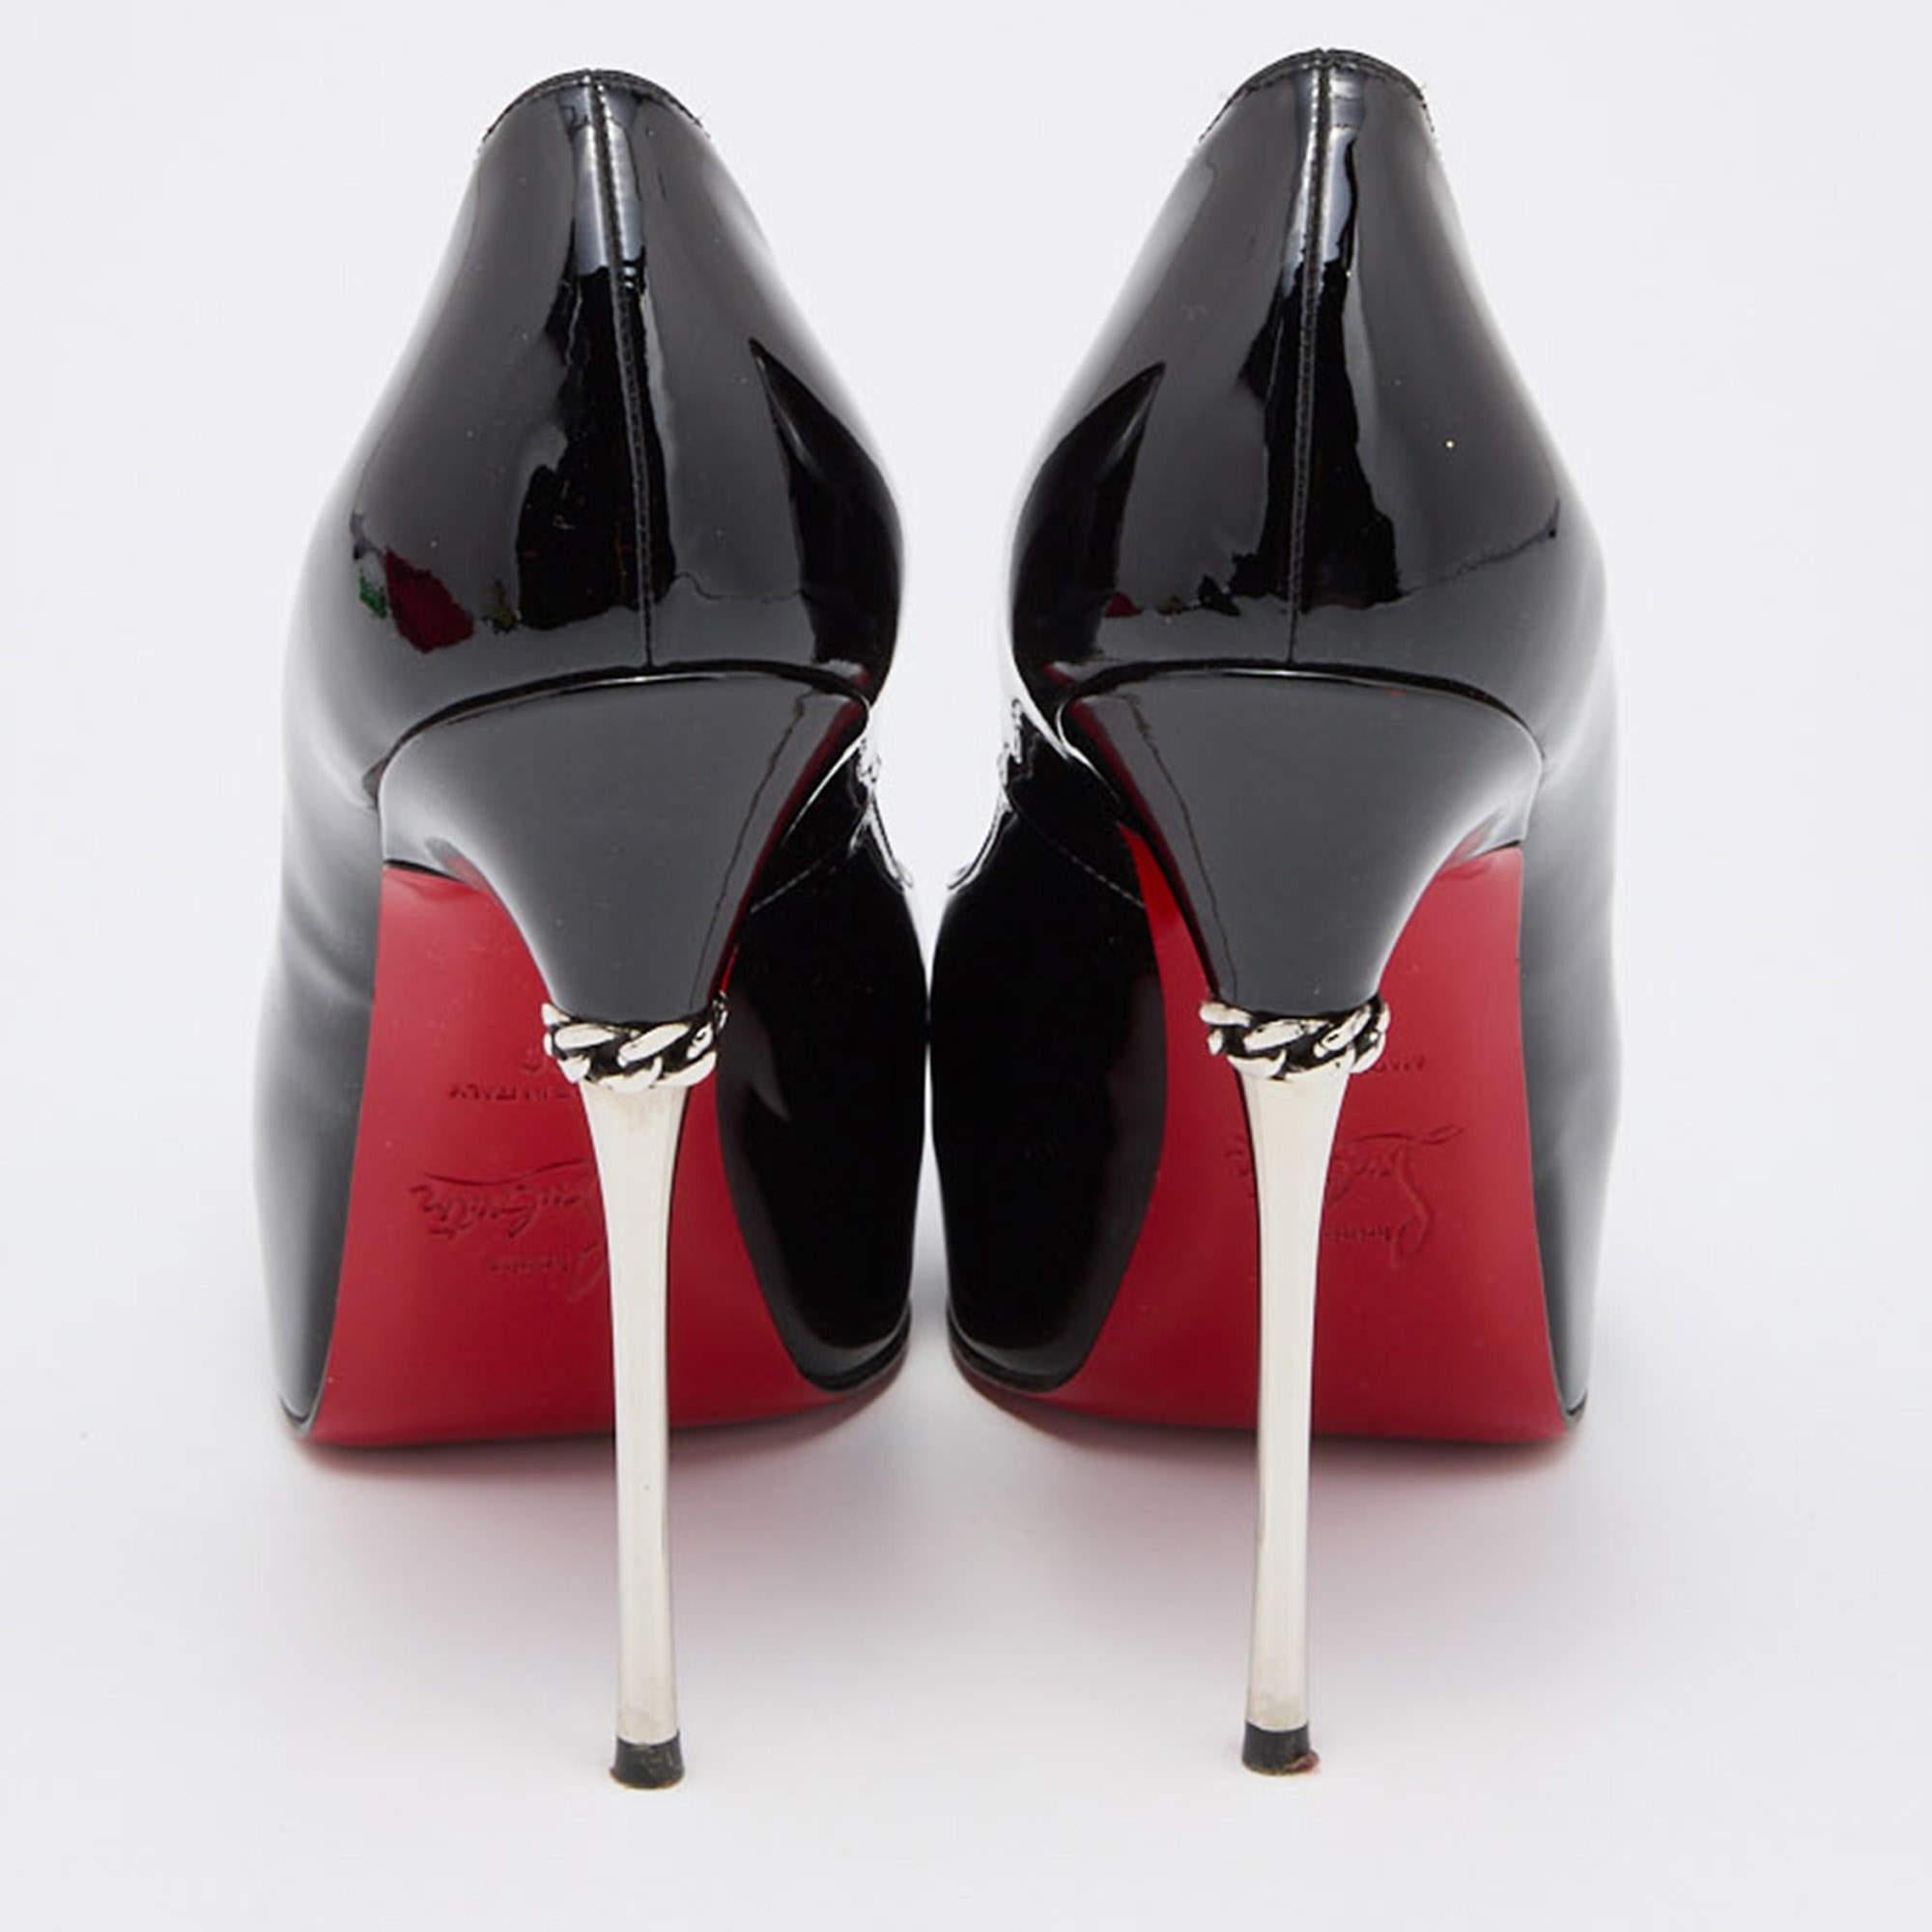 This pair of pumps is uniquely designed and makes for a distinct appearance. Created from quality materials, it is enriched with classic elements.

Includes Original Dustbag